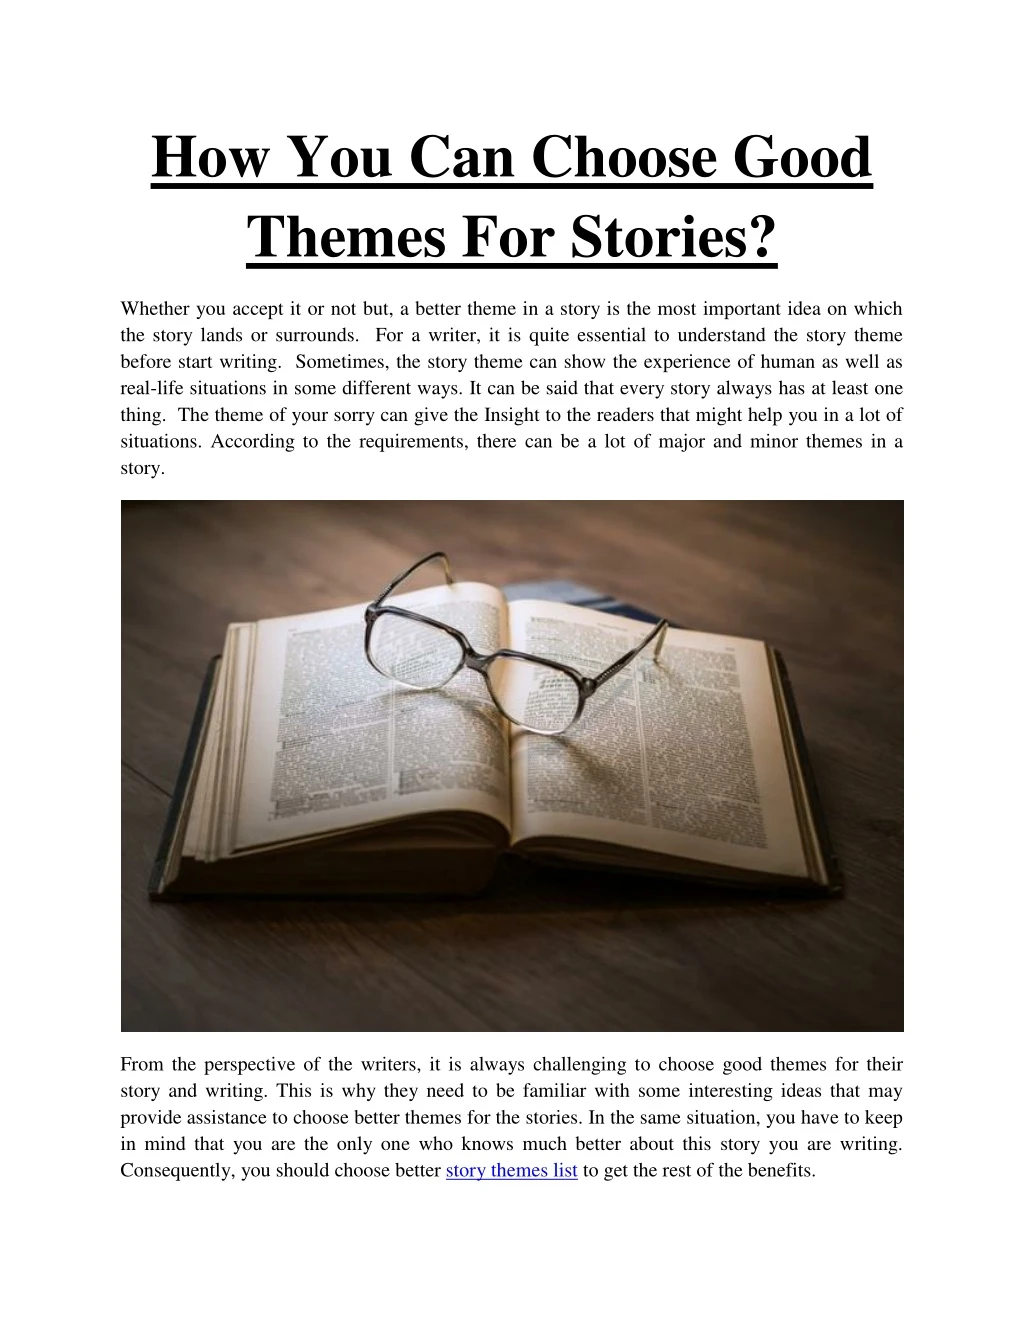 how you can choose good themes for stories